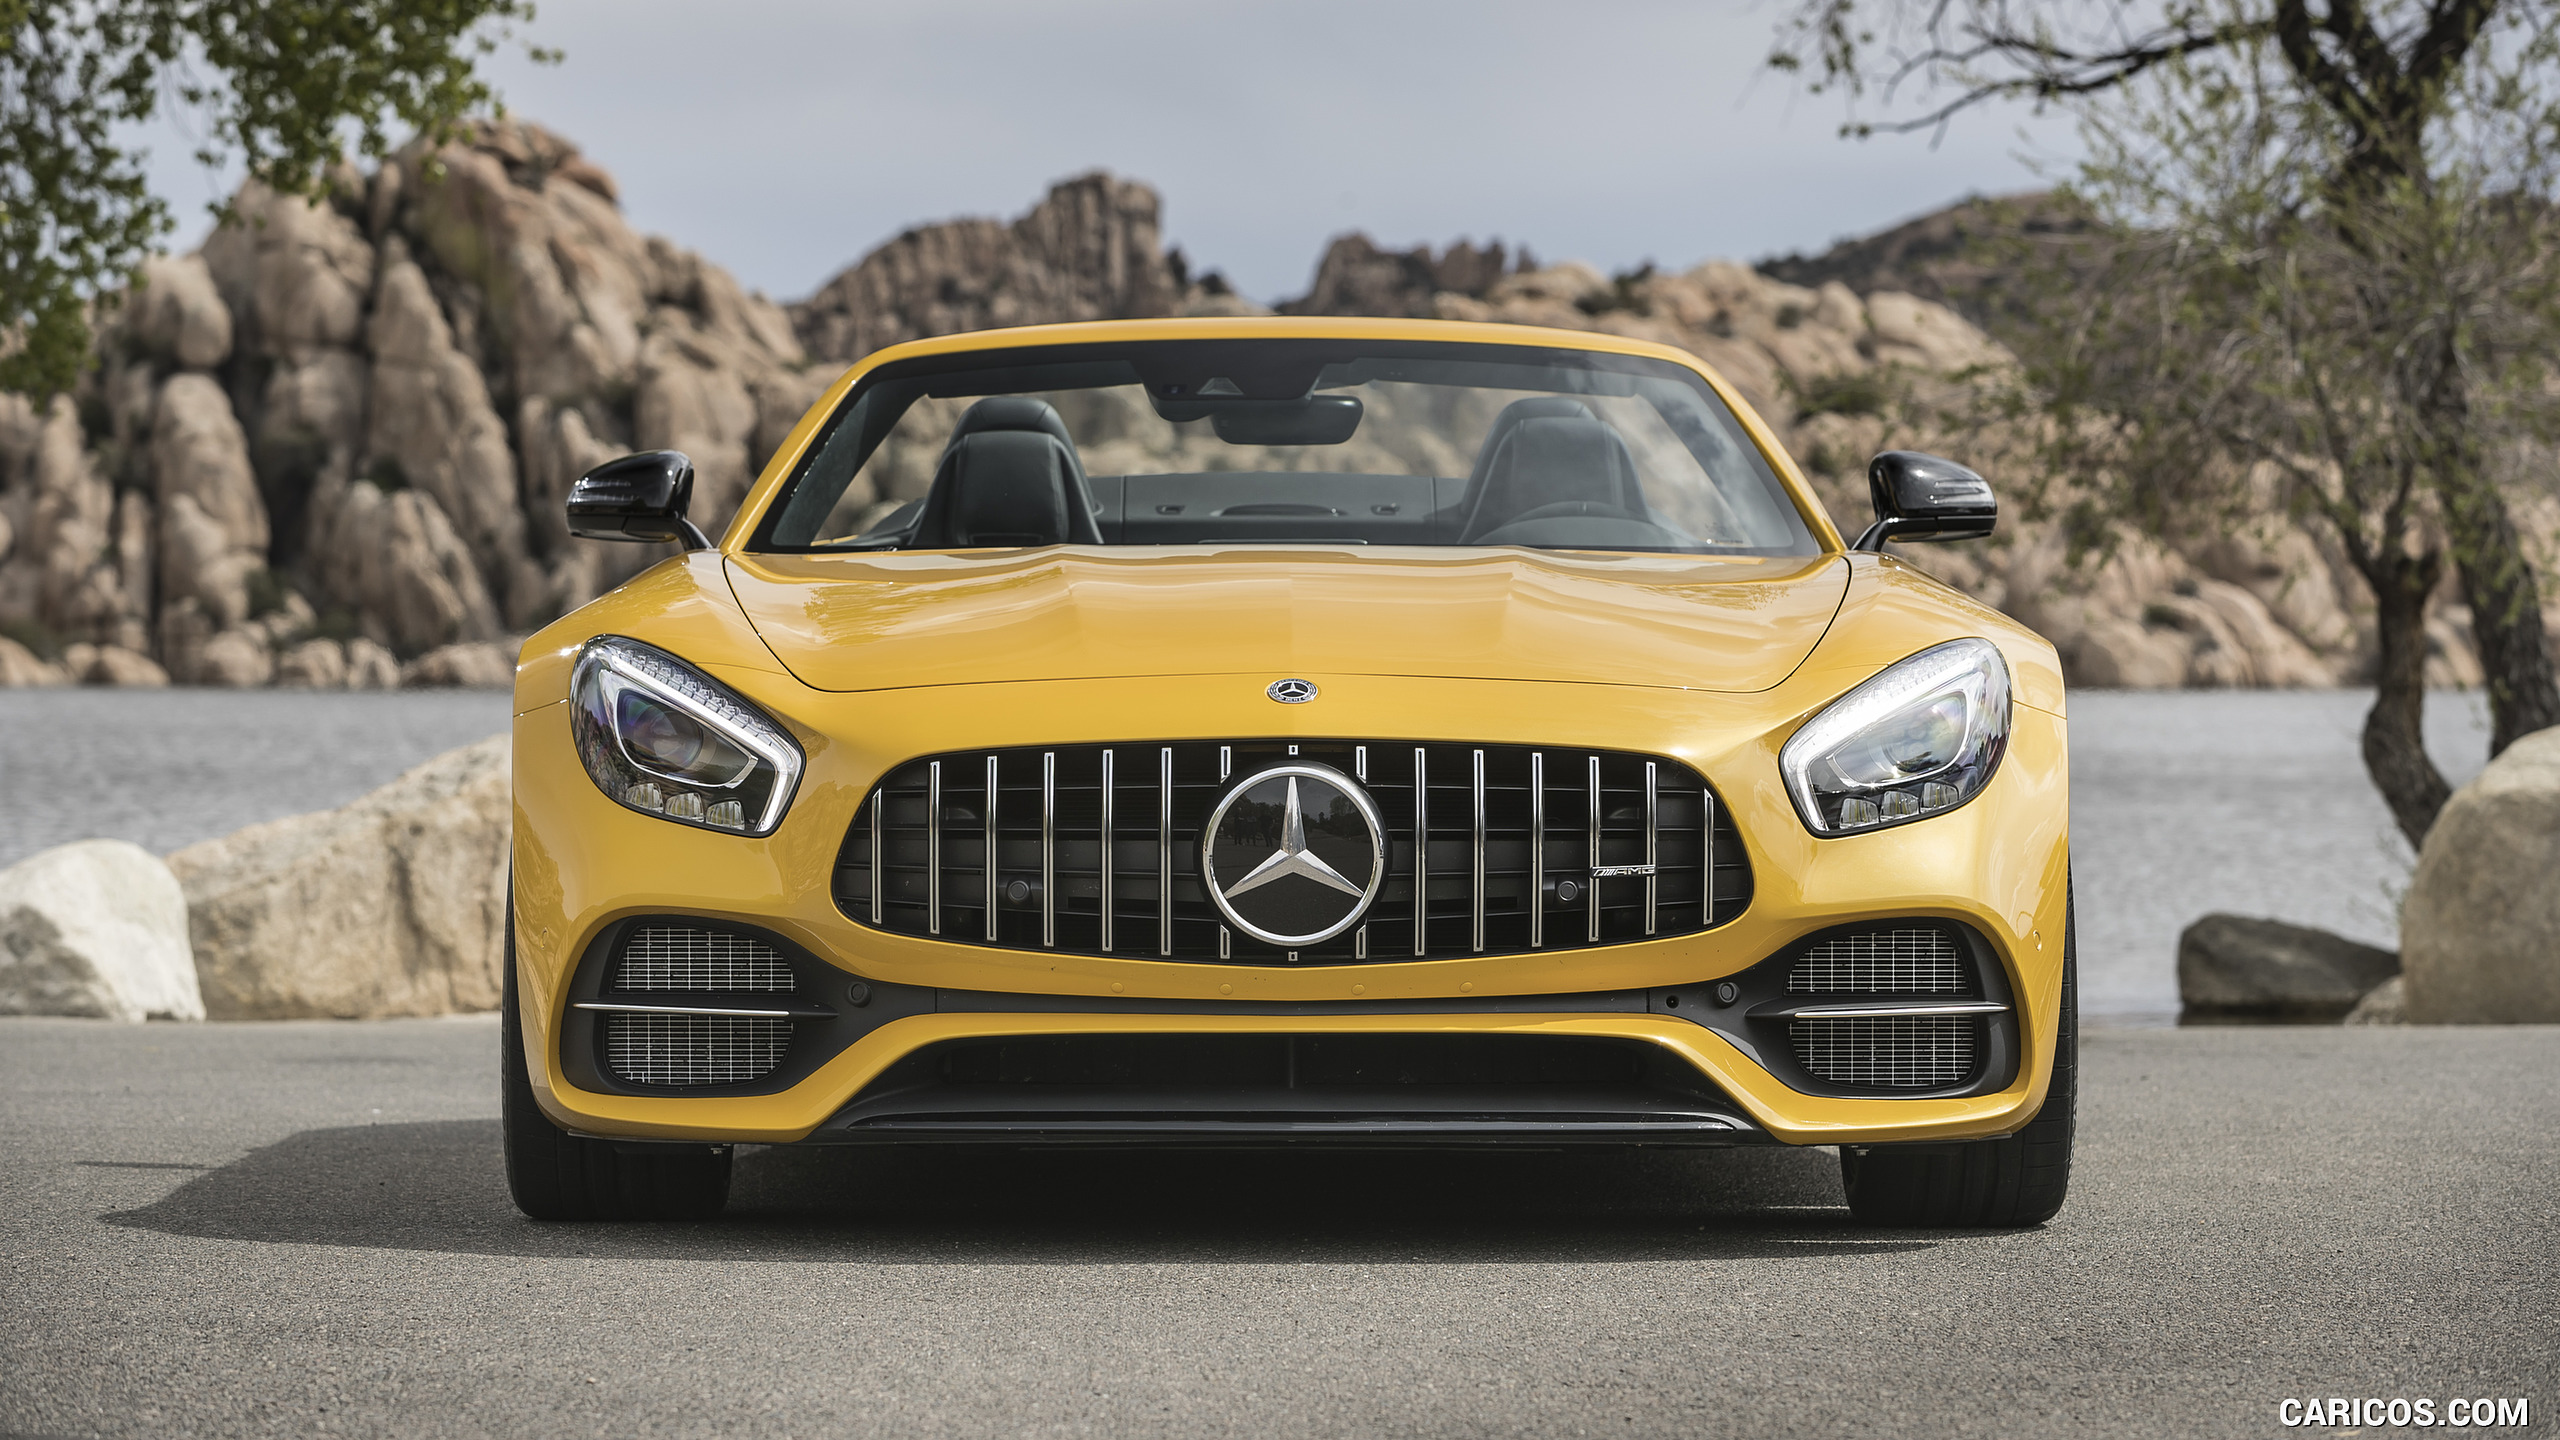 2018 Mercedes-AMG GT C Roadster - Front, #216 of 350